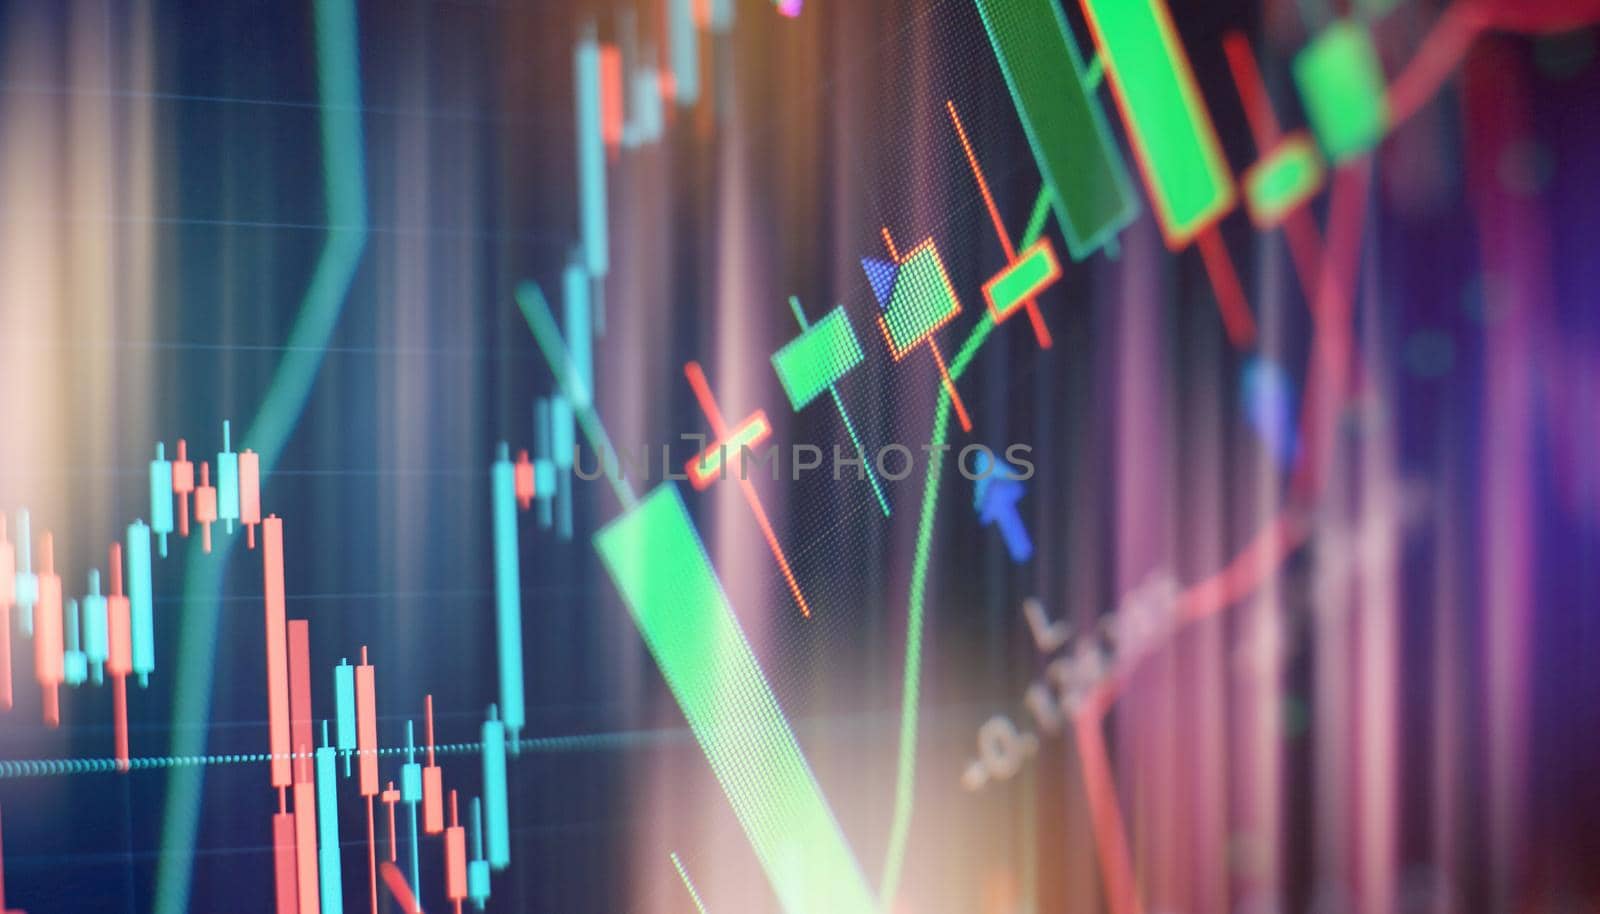 Market Analyze. Bar graphs, Diagrams, financial figures. Abstract glowing forex chart interface wallpaper. Investment, trade, stock, finance